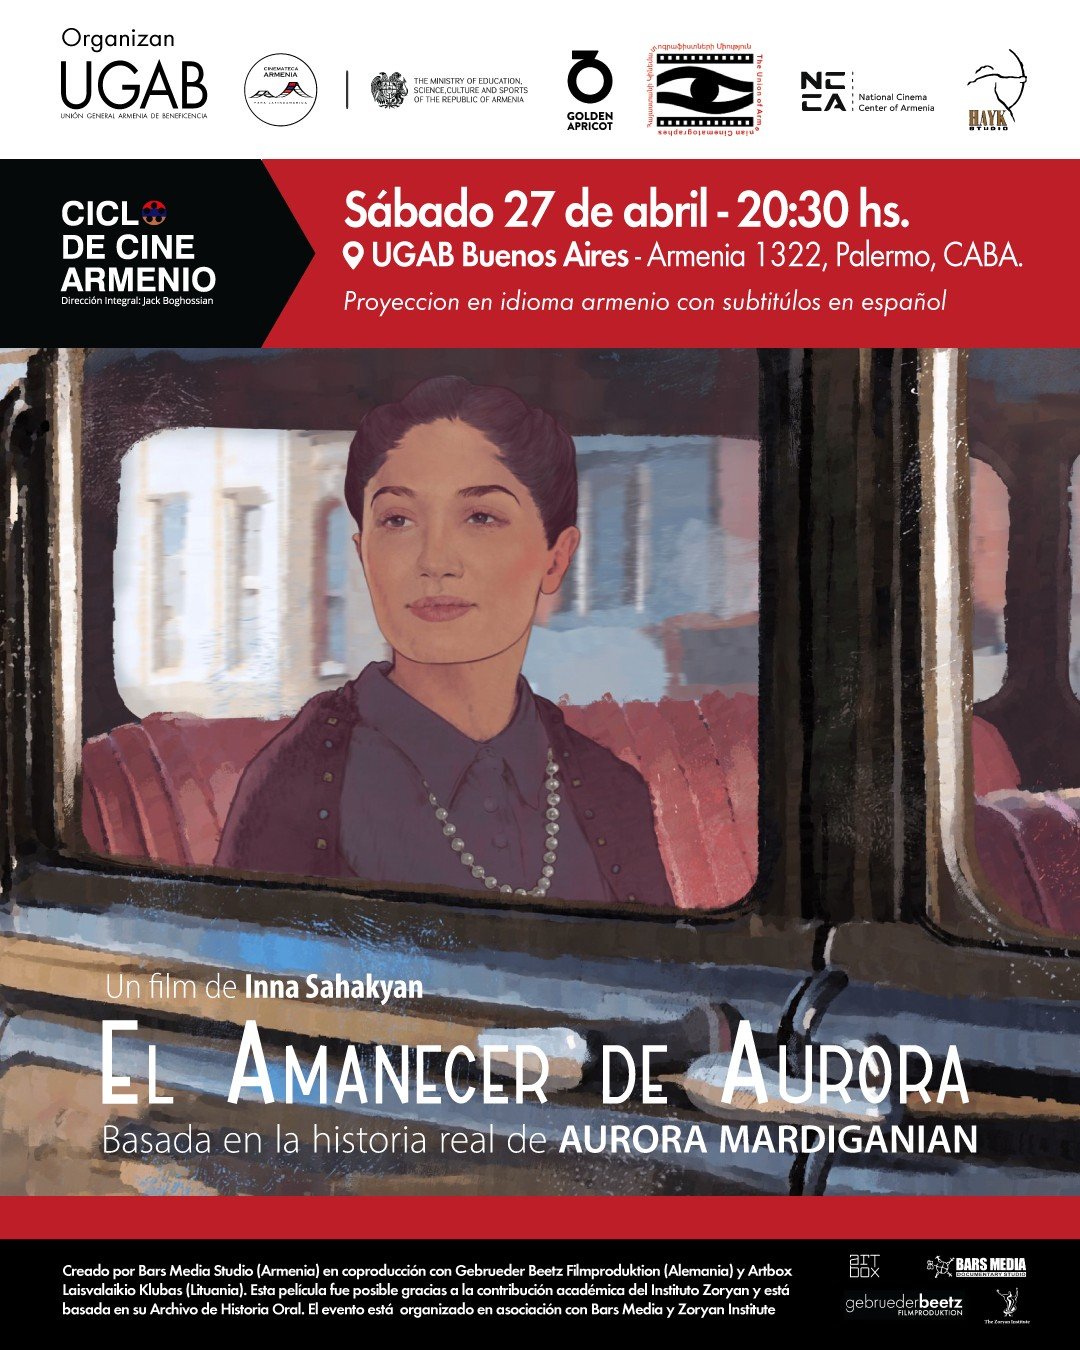 Armenian Film Series 🎬 in Argentina!

We're excited to welcome you all on Saturday 📅 April 27th at 20:30pm at the AGBU Auditorium Buenos Aires📍Armenia 1322, Palermo, CABA.

️️Entrance is free, but make sure to secure your spot by registering throu